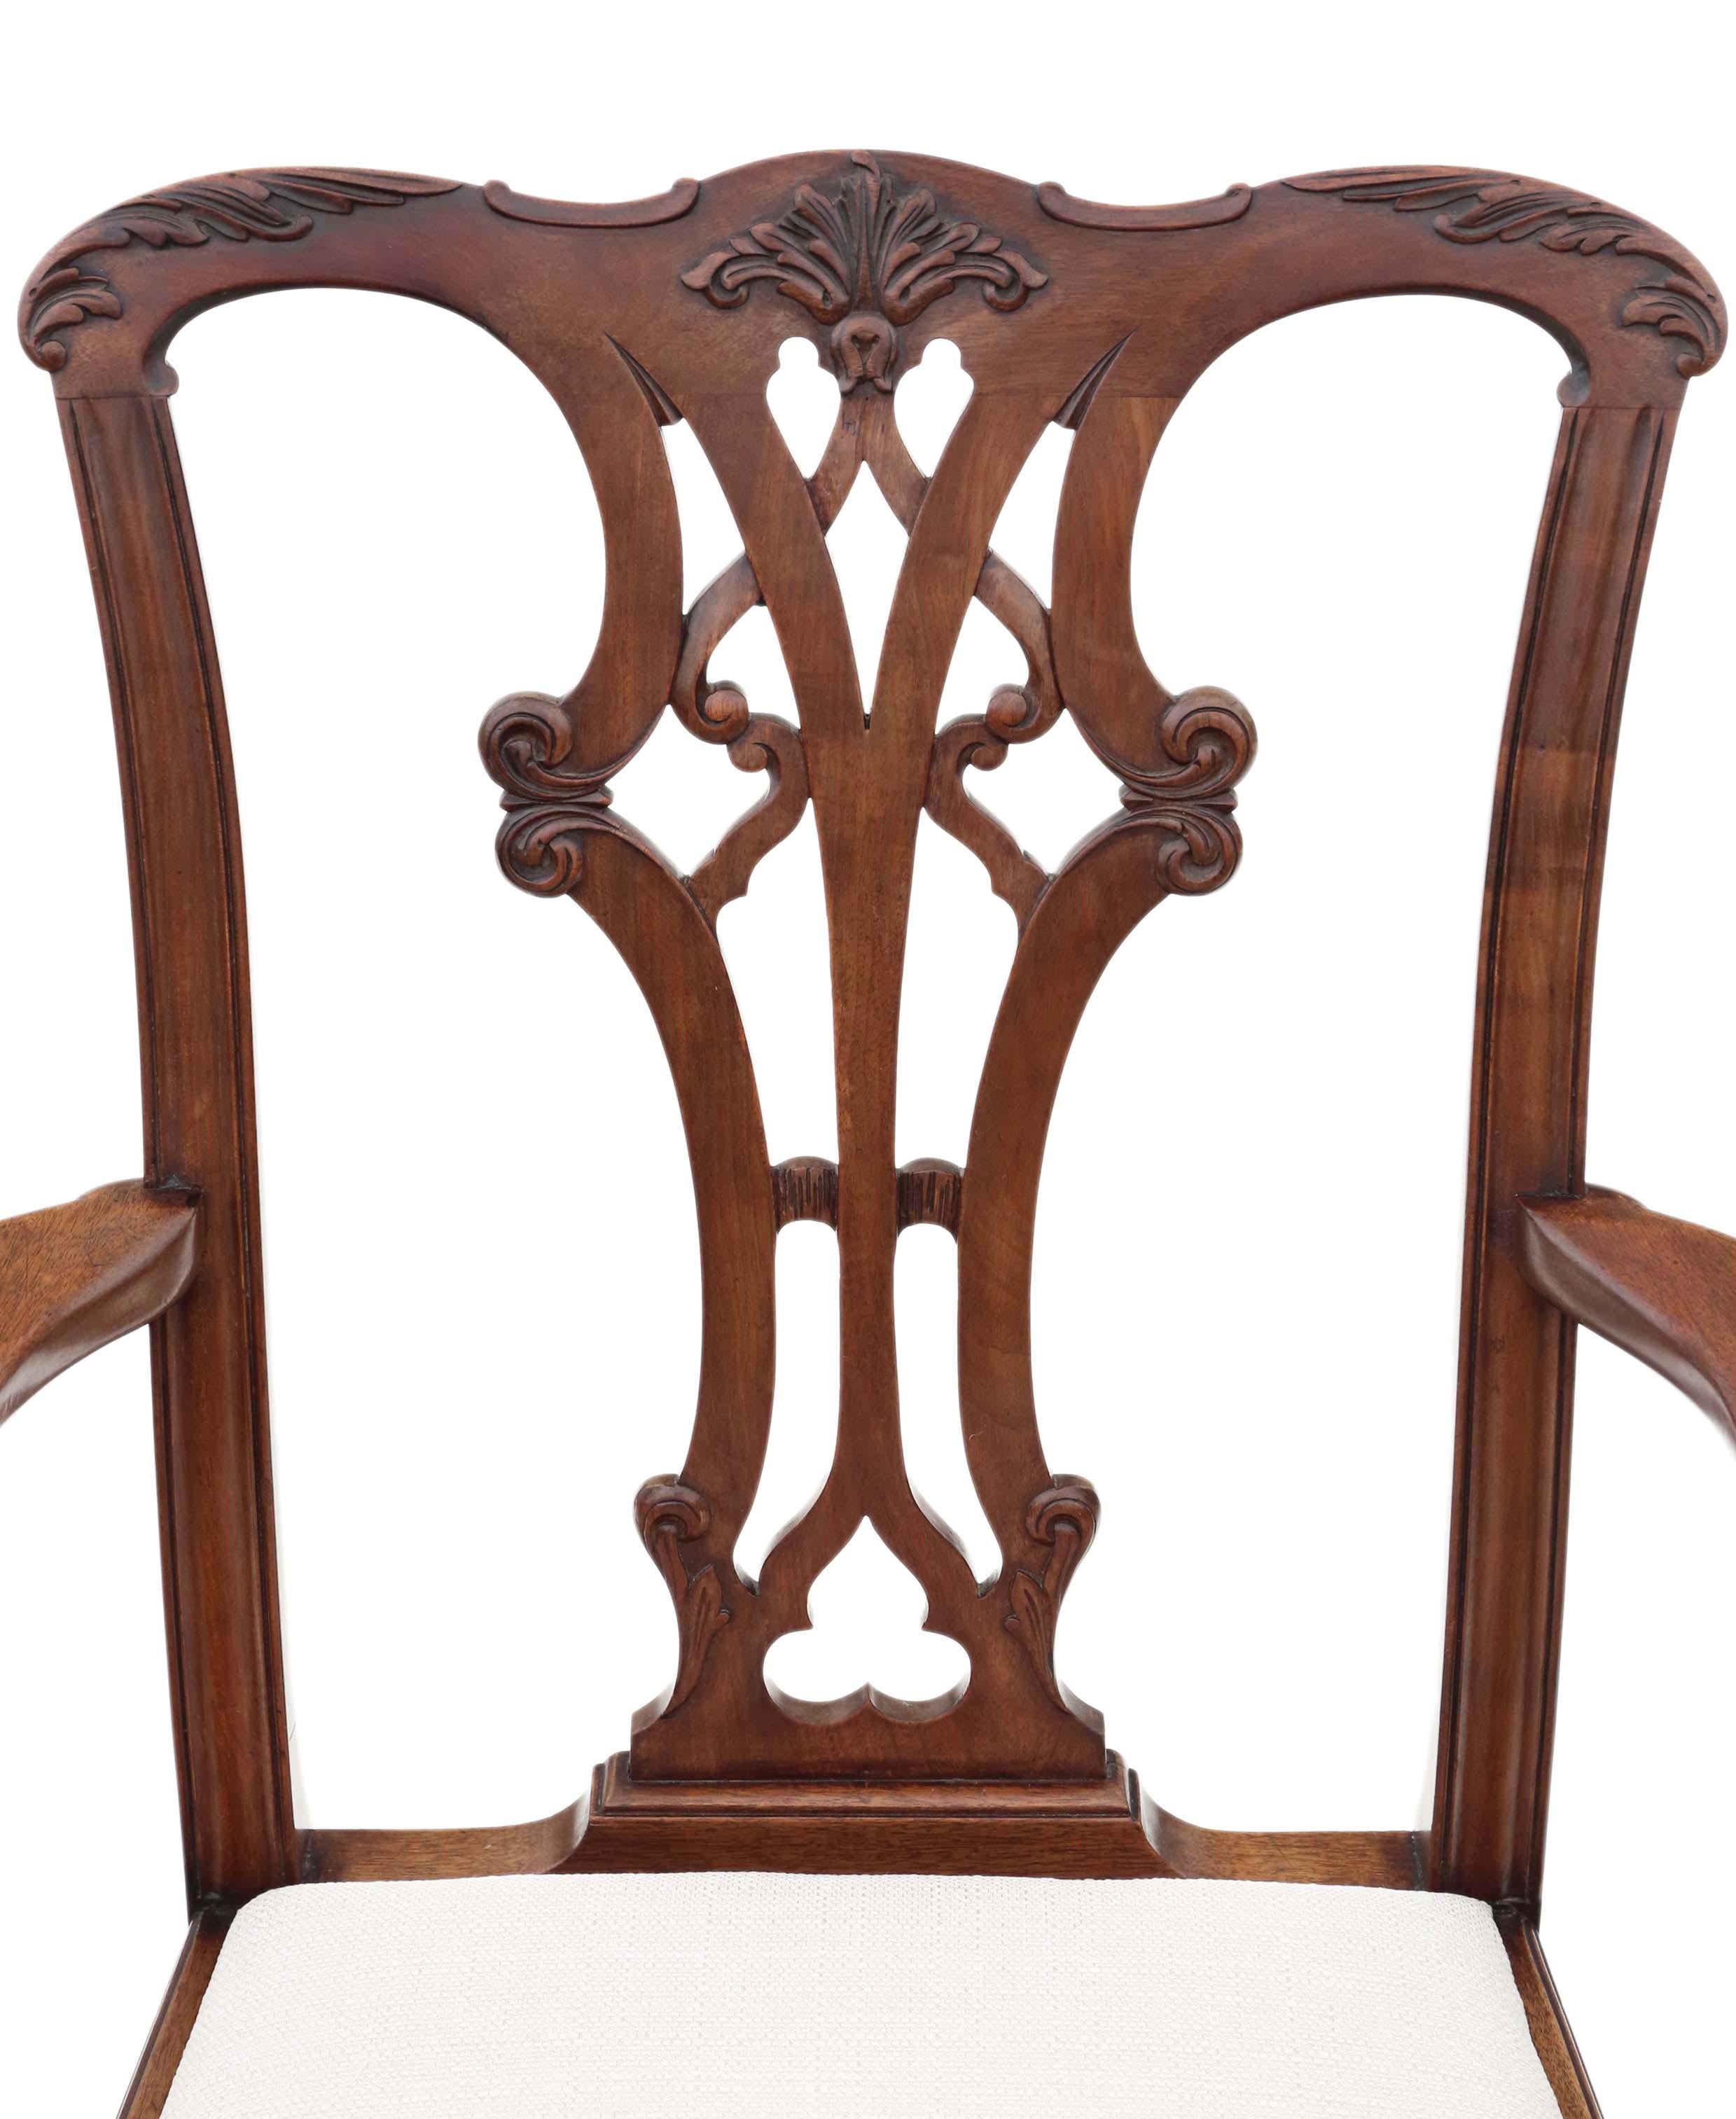 Early 20th Century Antique Set of 8 '6+2' Mahogany Dining Chairs Georgian Revival, circa 1910